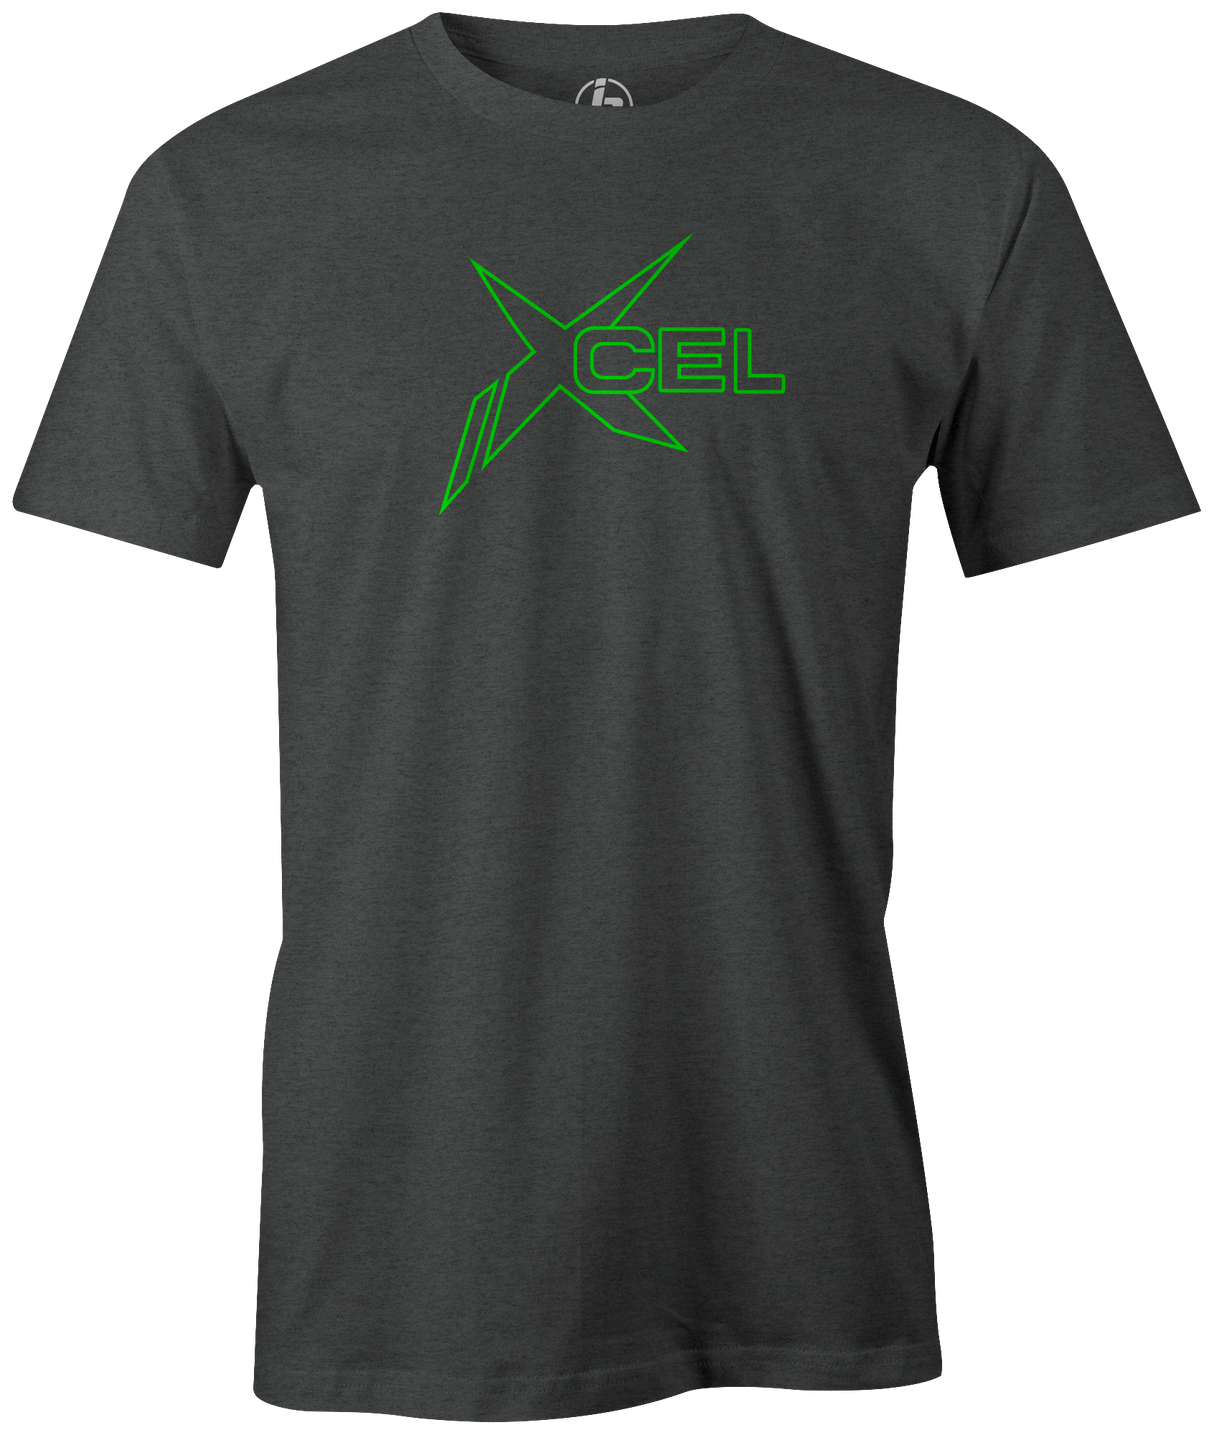 Re-live this old school ball with this Ebonite Xcel Ball logo T-shirt! Tommy jones. Wear this Ebonite T-shirt with pride! Hit the lanes in this awesome Ebonite t-shirt and show everyone that you are a part of the team!  Tshirt, tee, tee-shirt, tee shirt, Pro shop. League bowling team shirt. PBA. PWBA. USBC. Junior Gold. Youth bowling. Tournament t-shirt. Men's. Bowling Ball. 